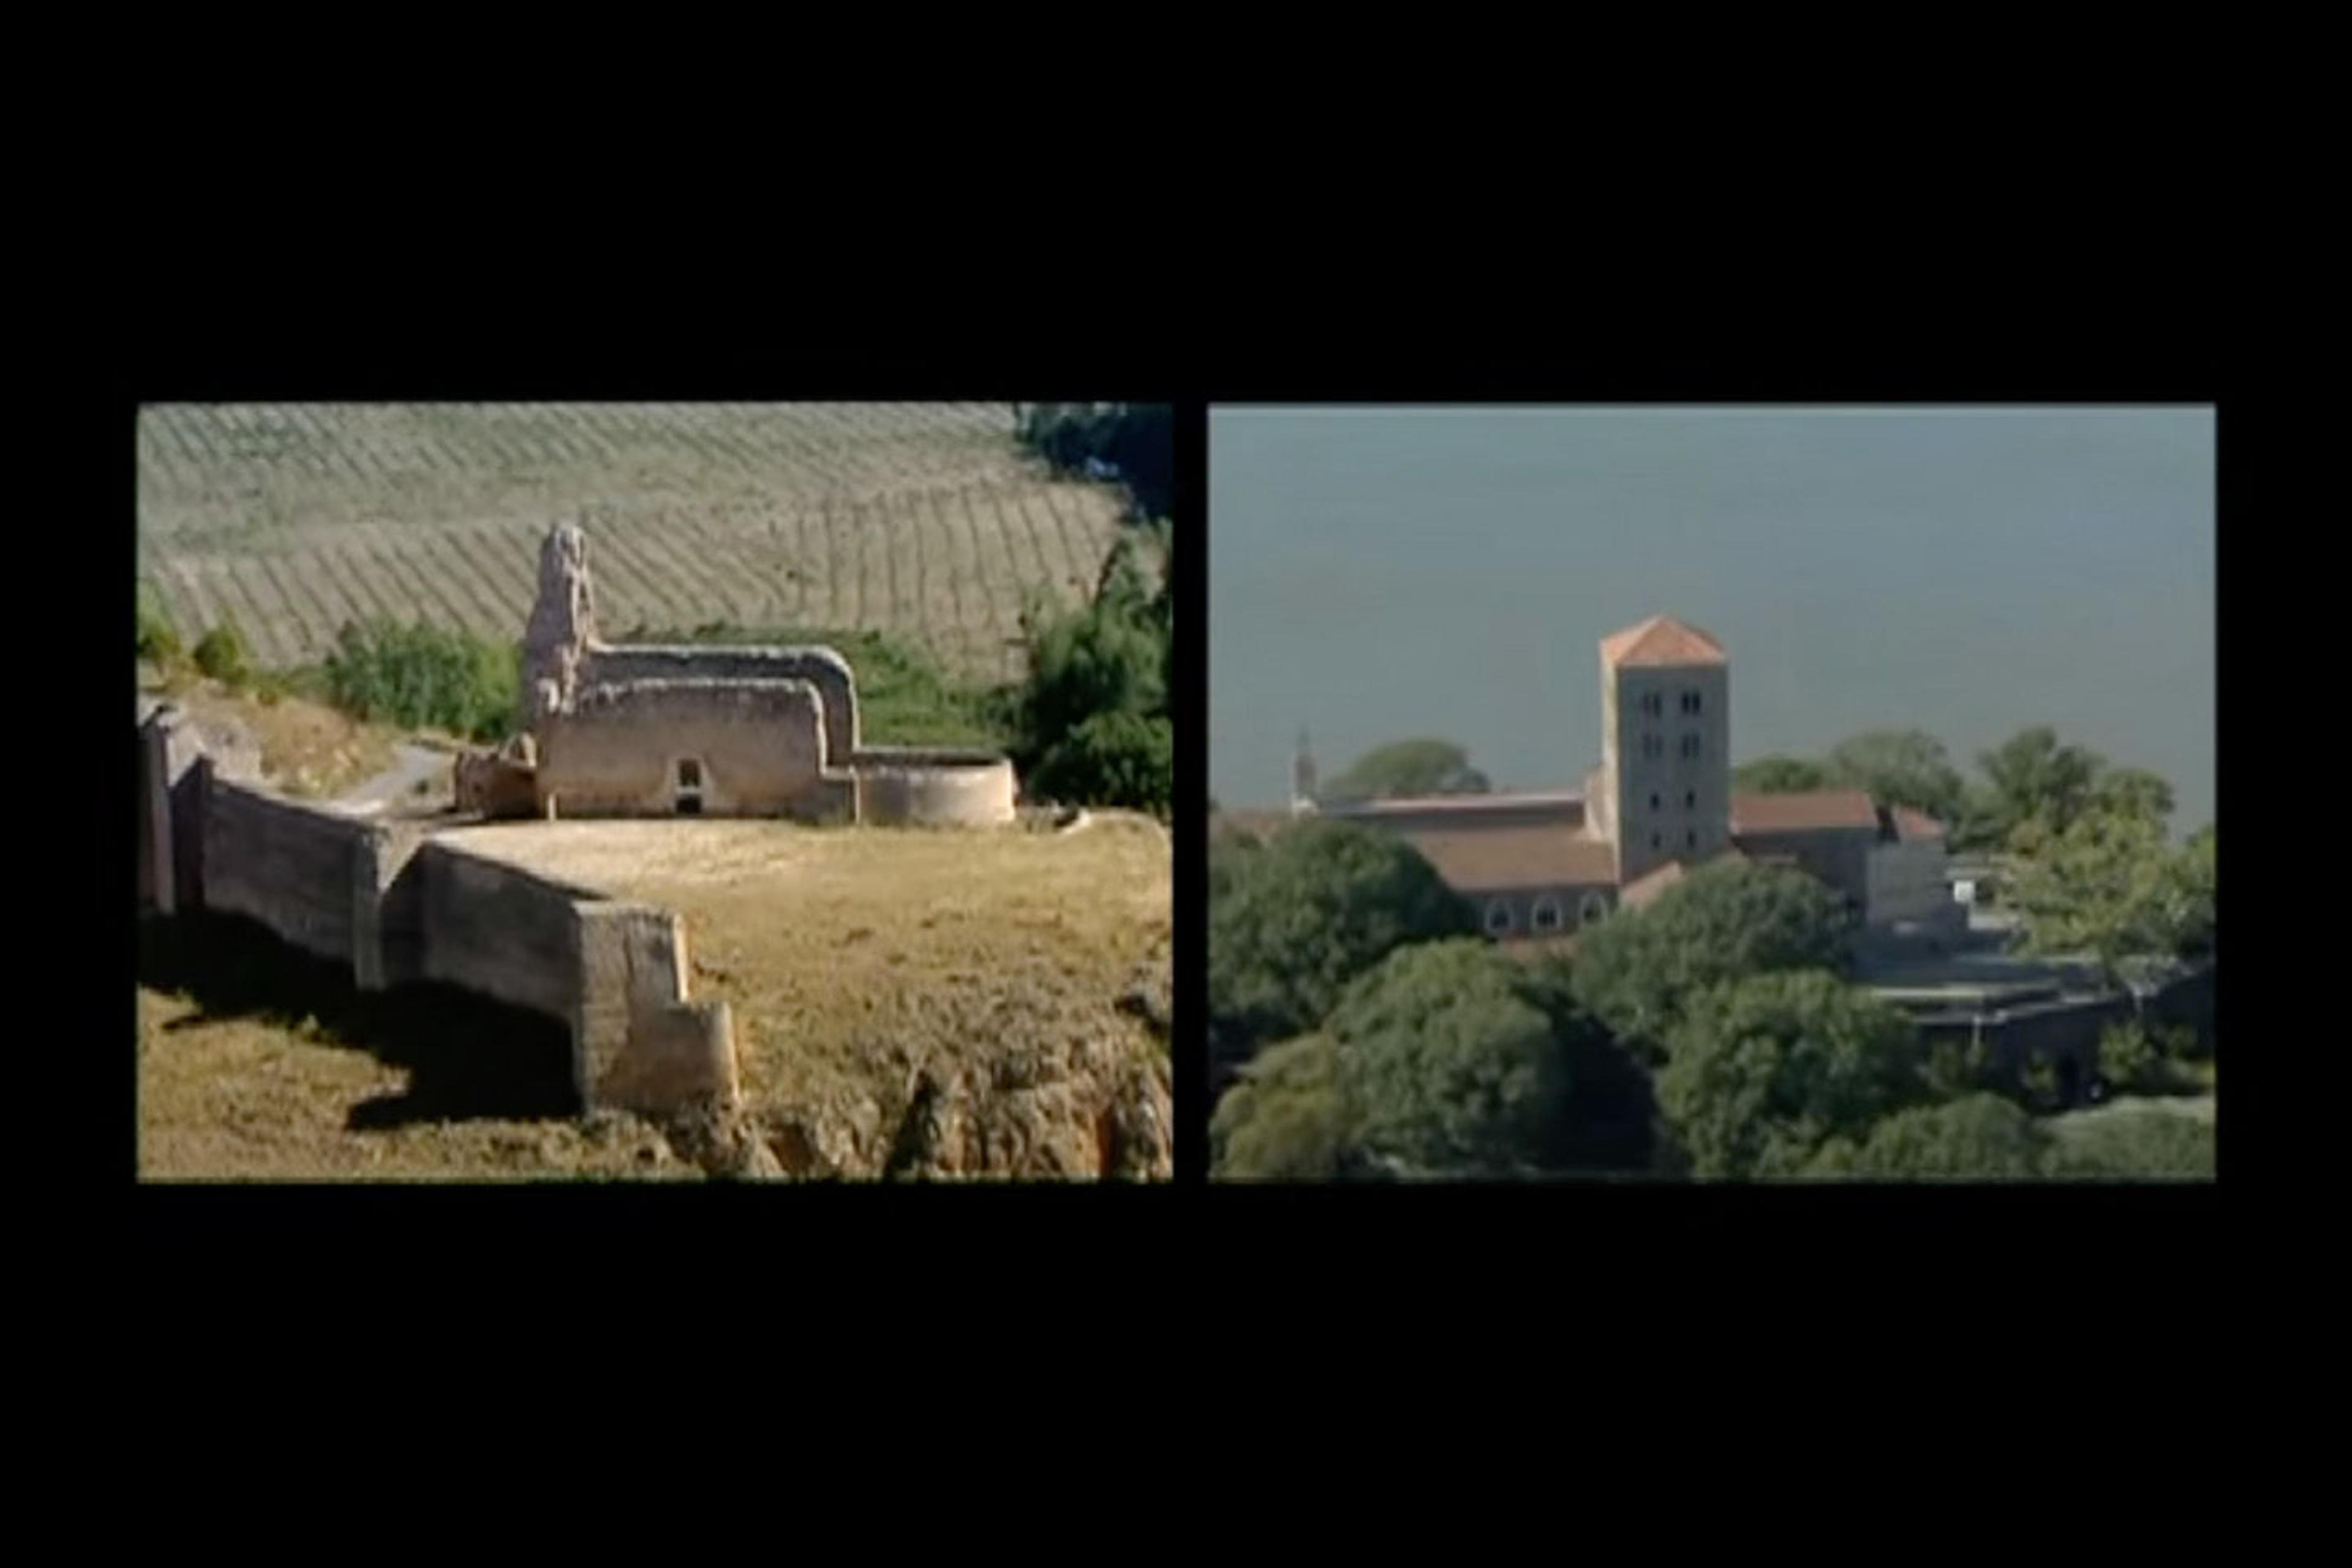 Still from the Fuentidueña Apse documentary